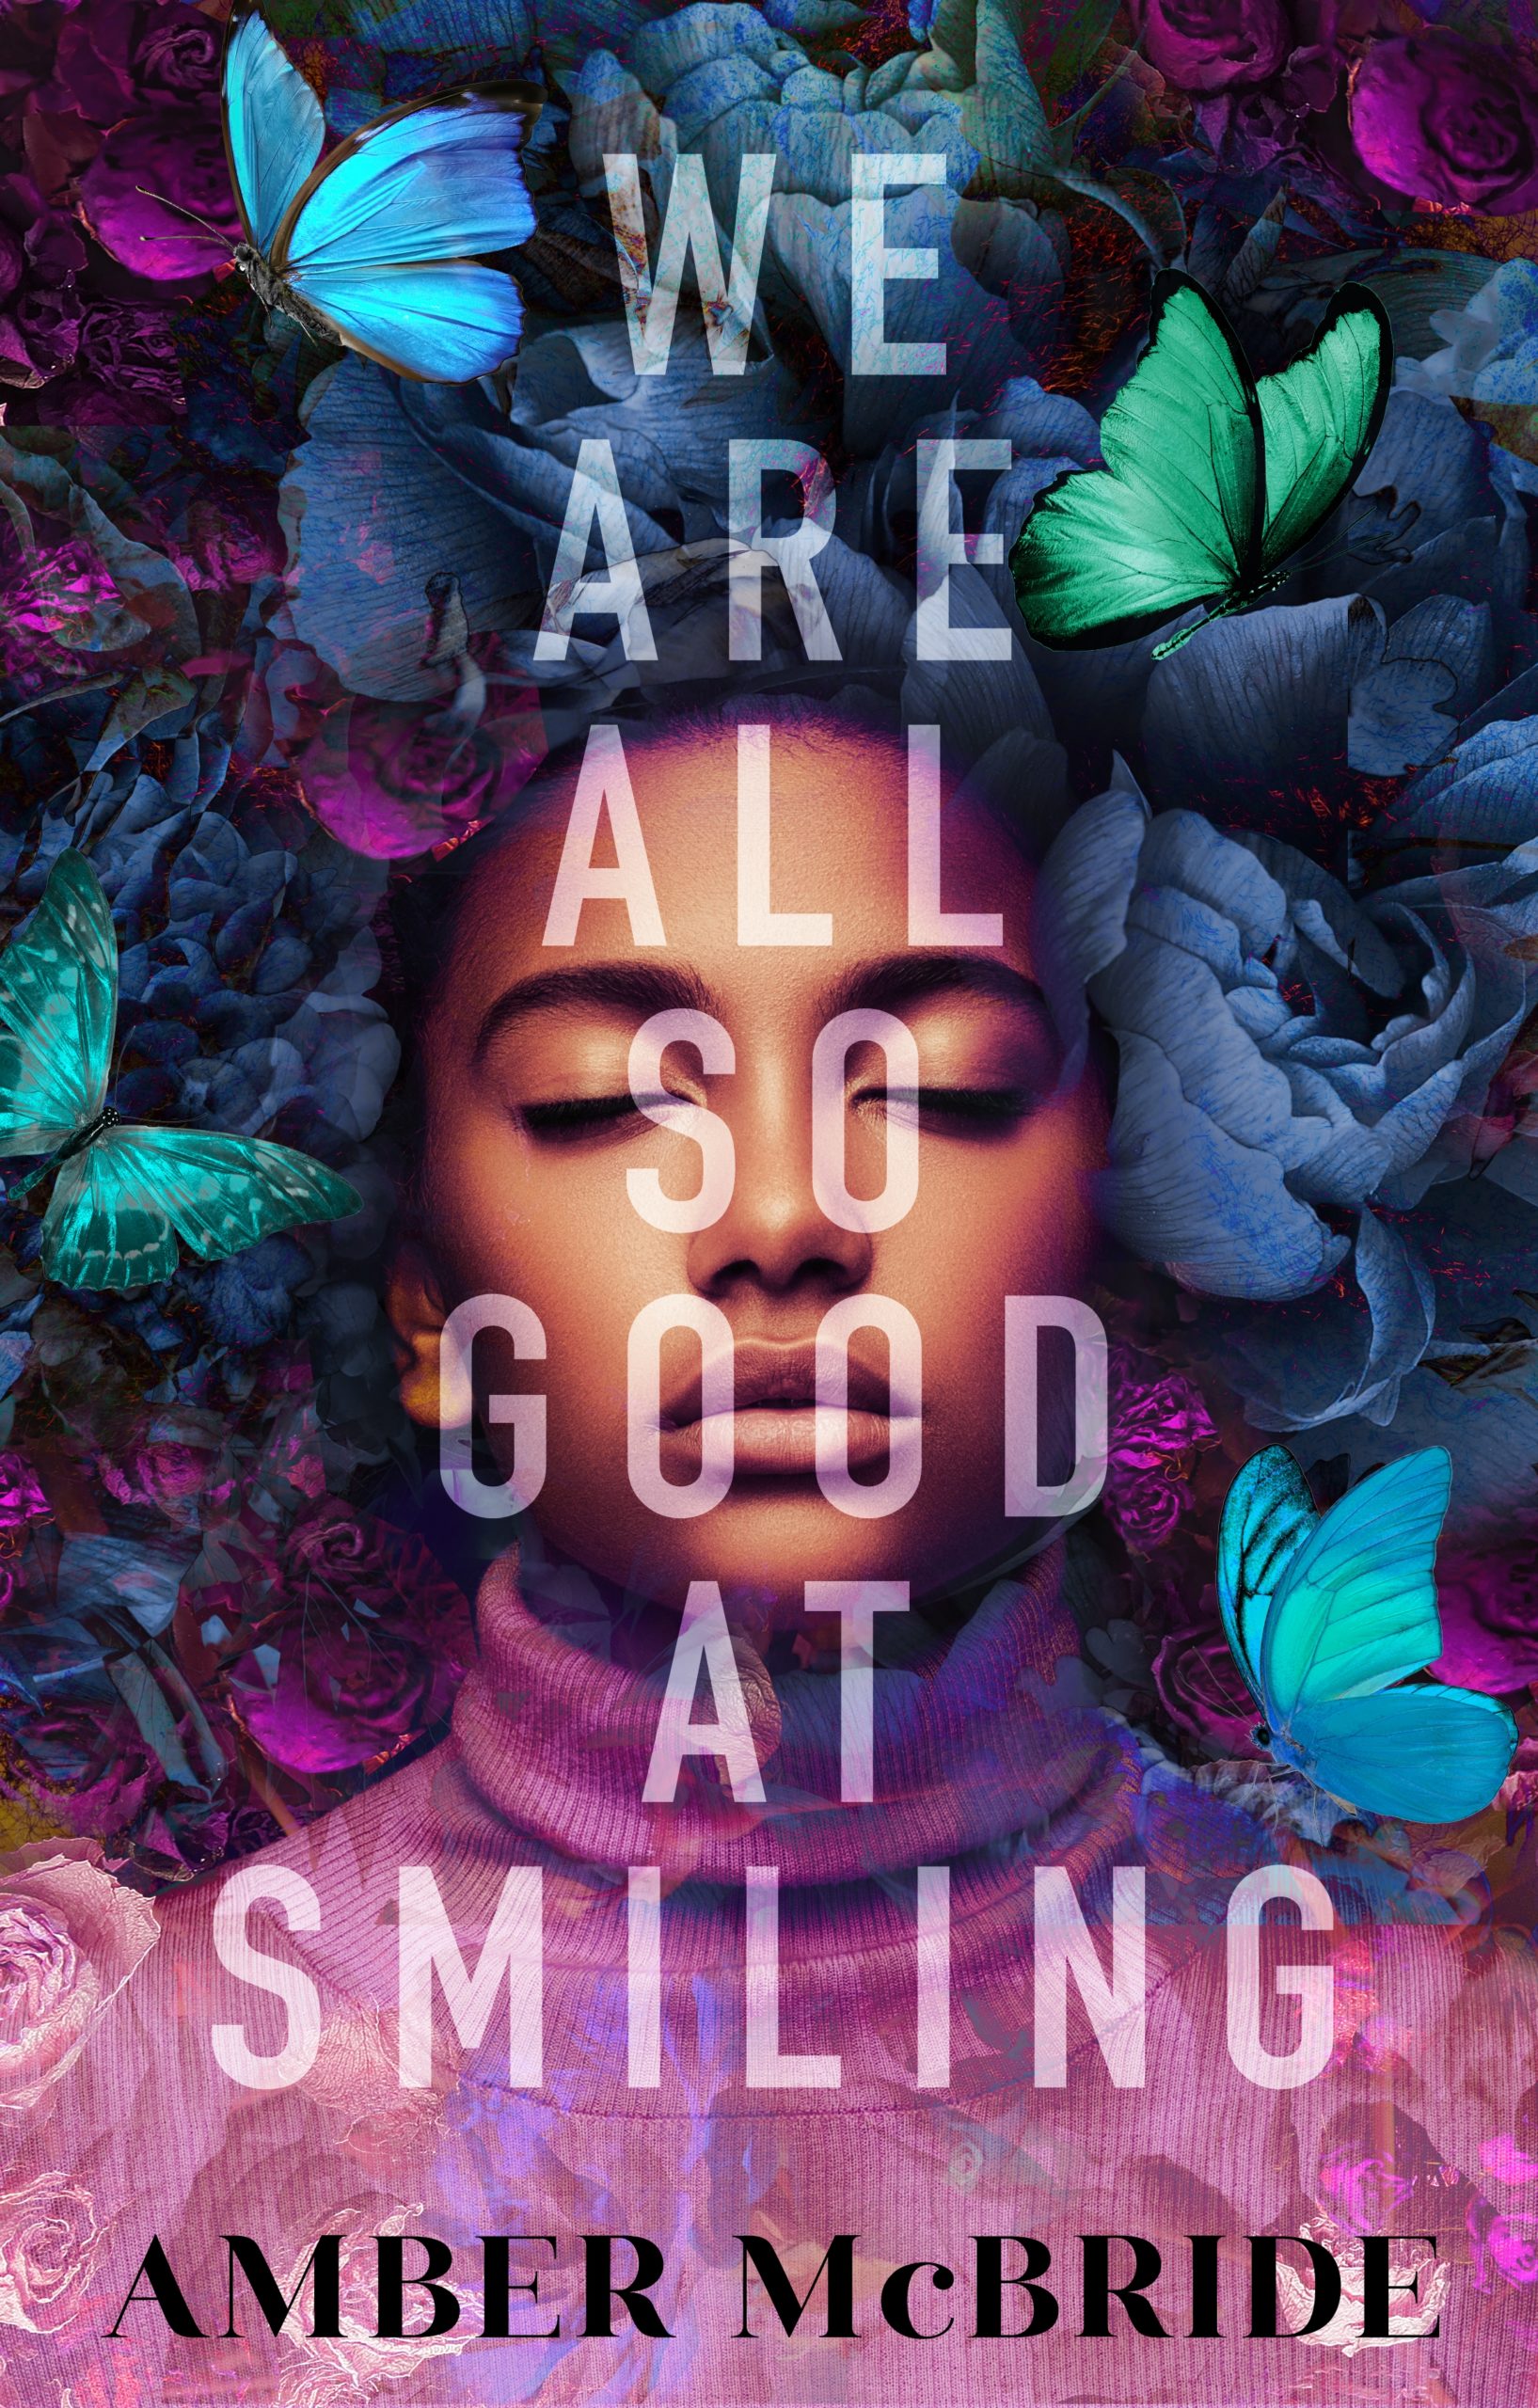 Images for We Are All So Good at Smiling